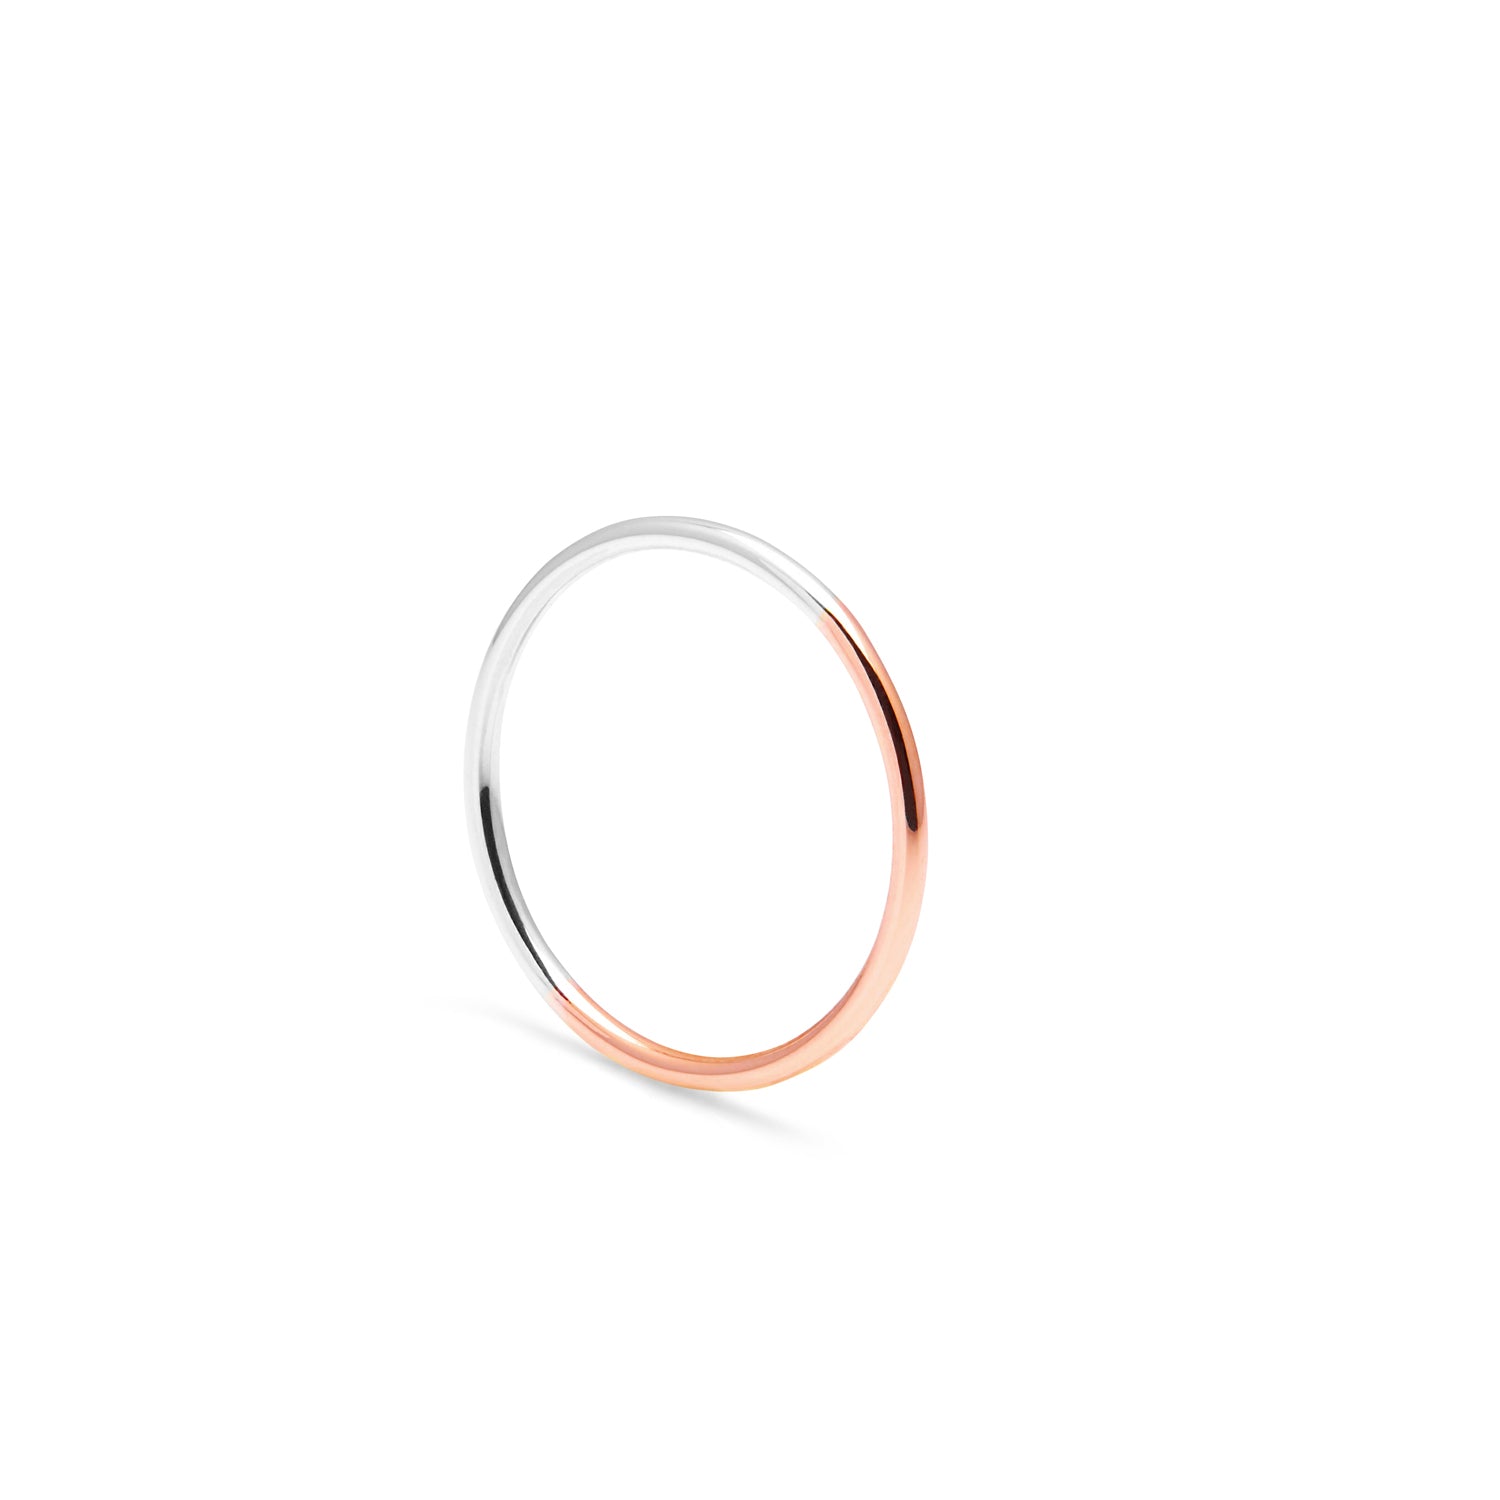 Two-tone Skinny Round Ring - 9k Rose & White Gold - Myia Bonner Jewellery